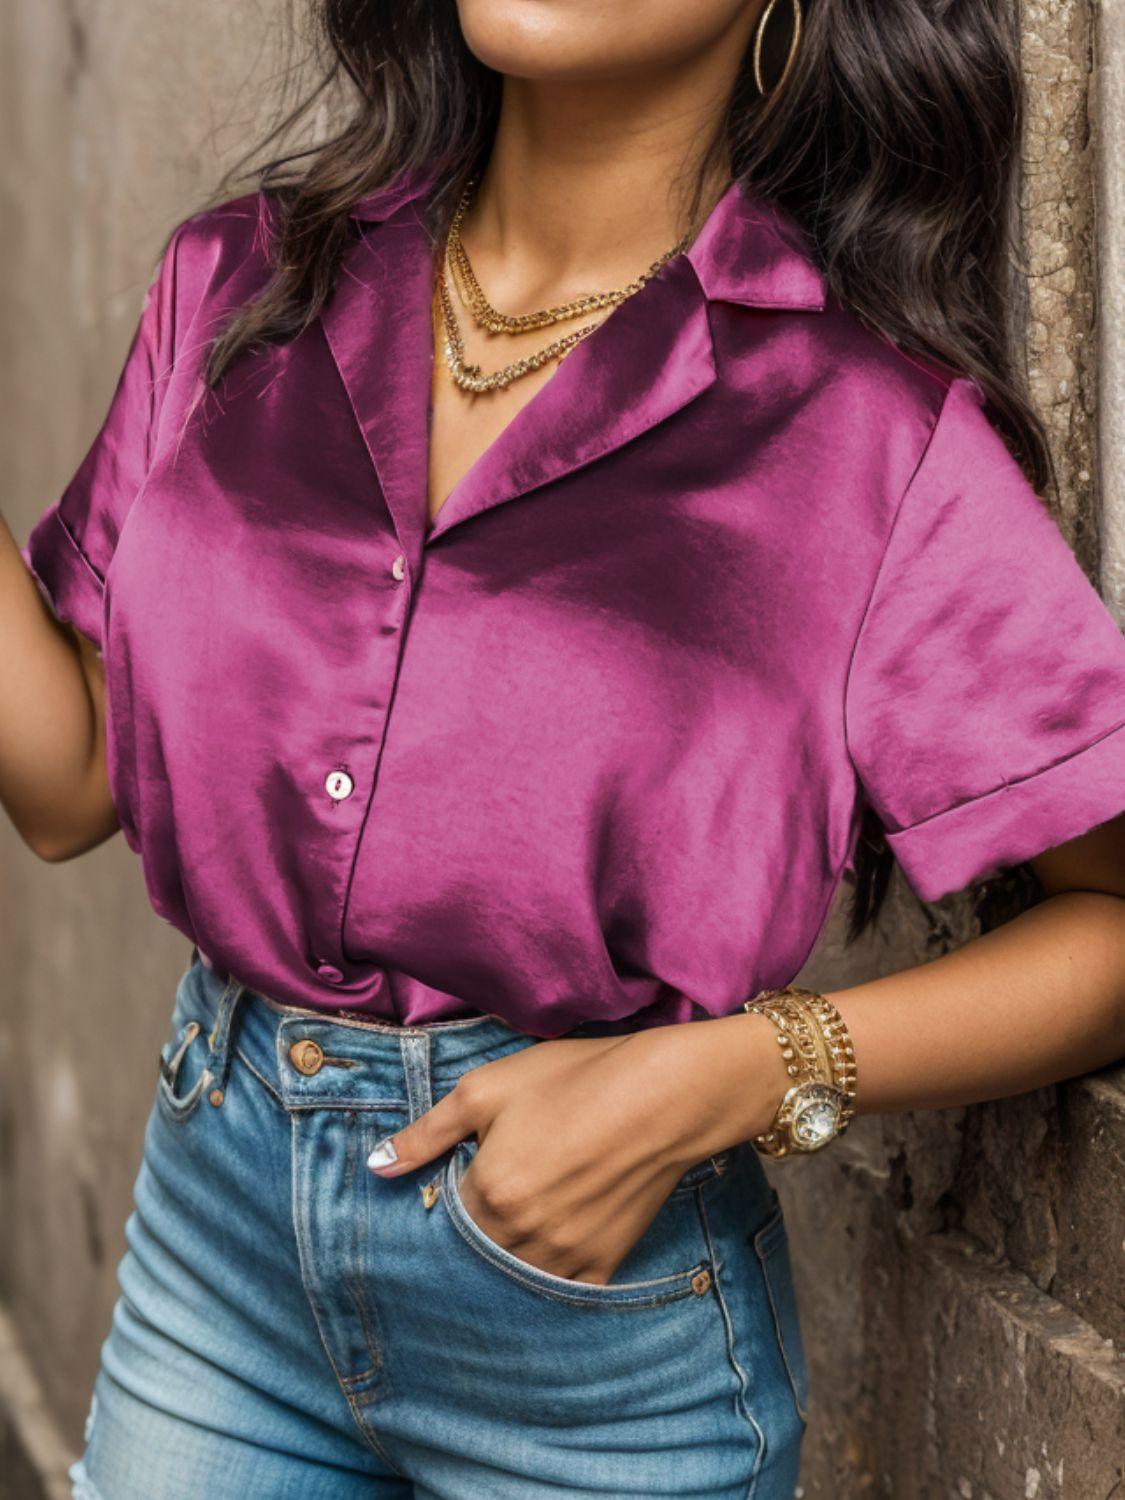 a woman in a pink shirt and jeans leaning against a wall